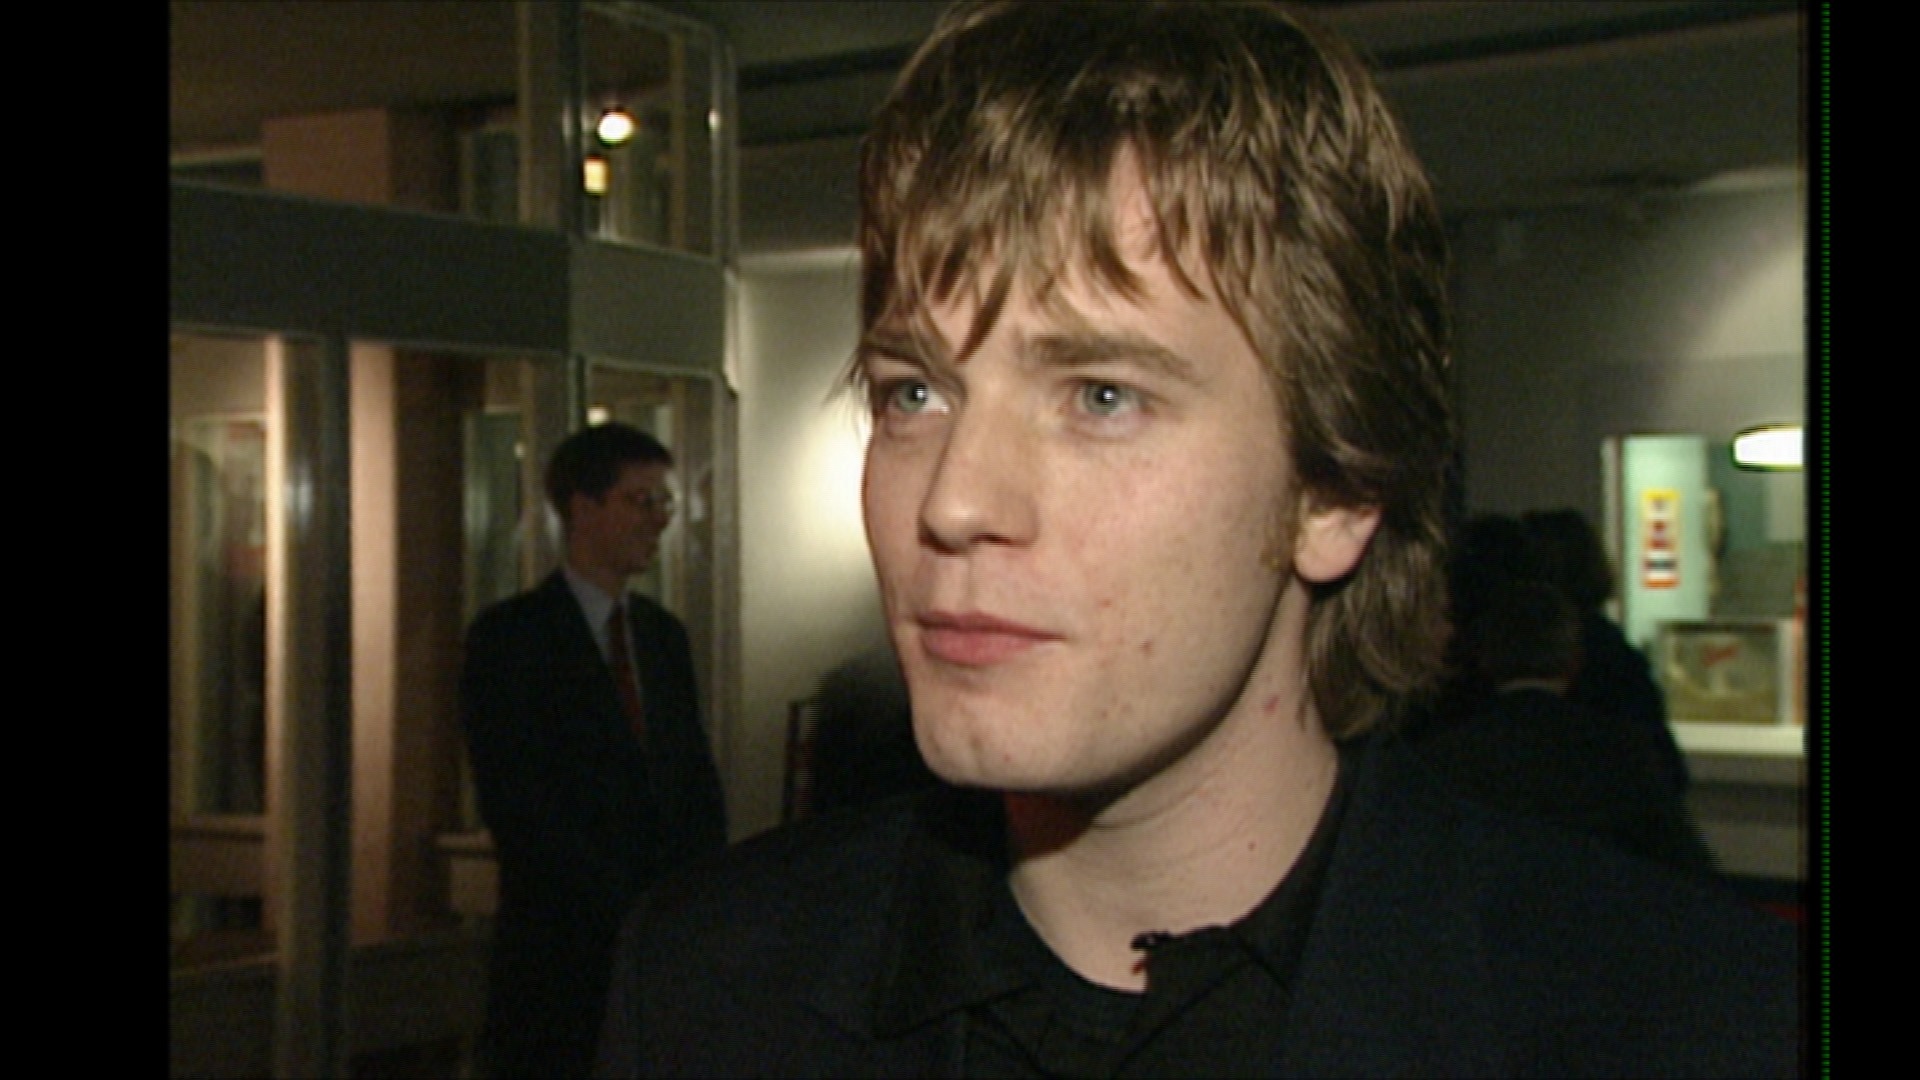 Ewan McGregor at the 1996 premiere of Trainspotting in Glasgow 